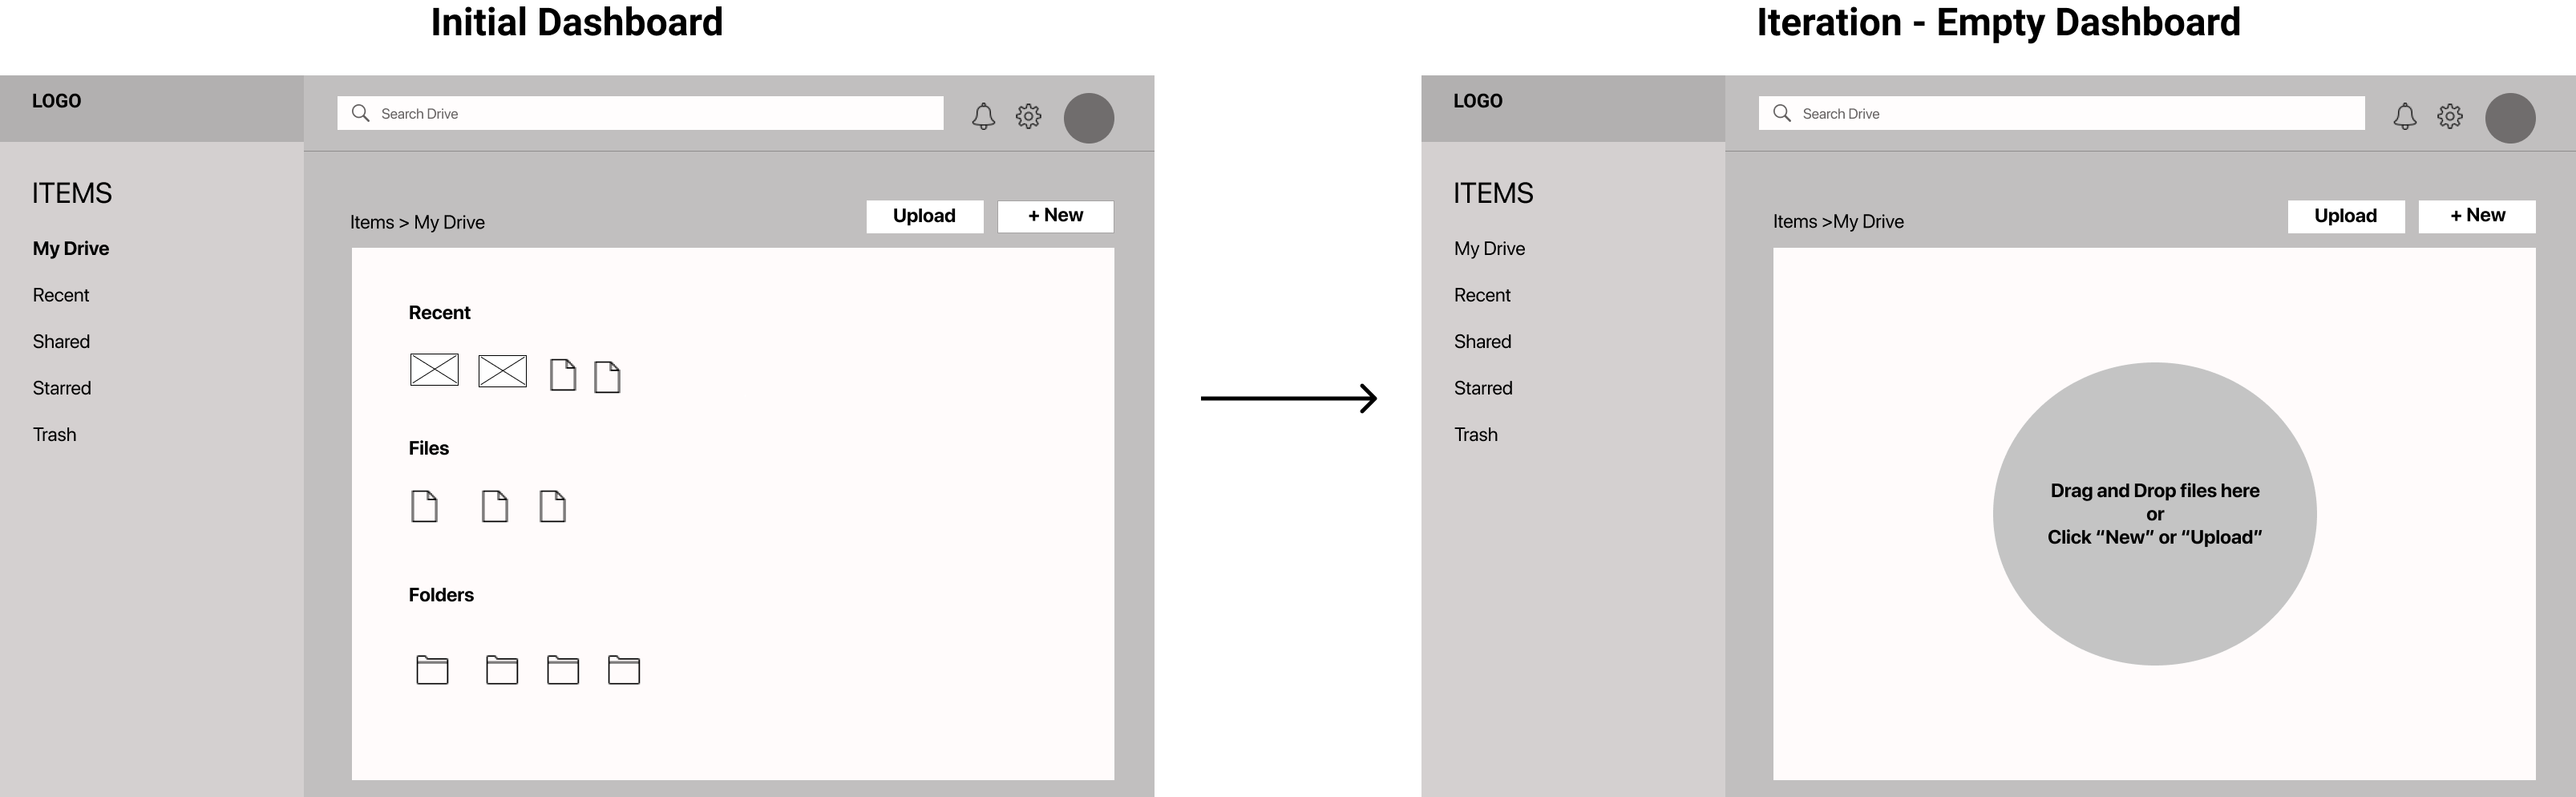 Wireframe showing the initial dashboard containing files and
                     folders as well as another wireframe showing iterated dashboard which is empty.